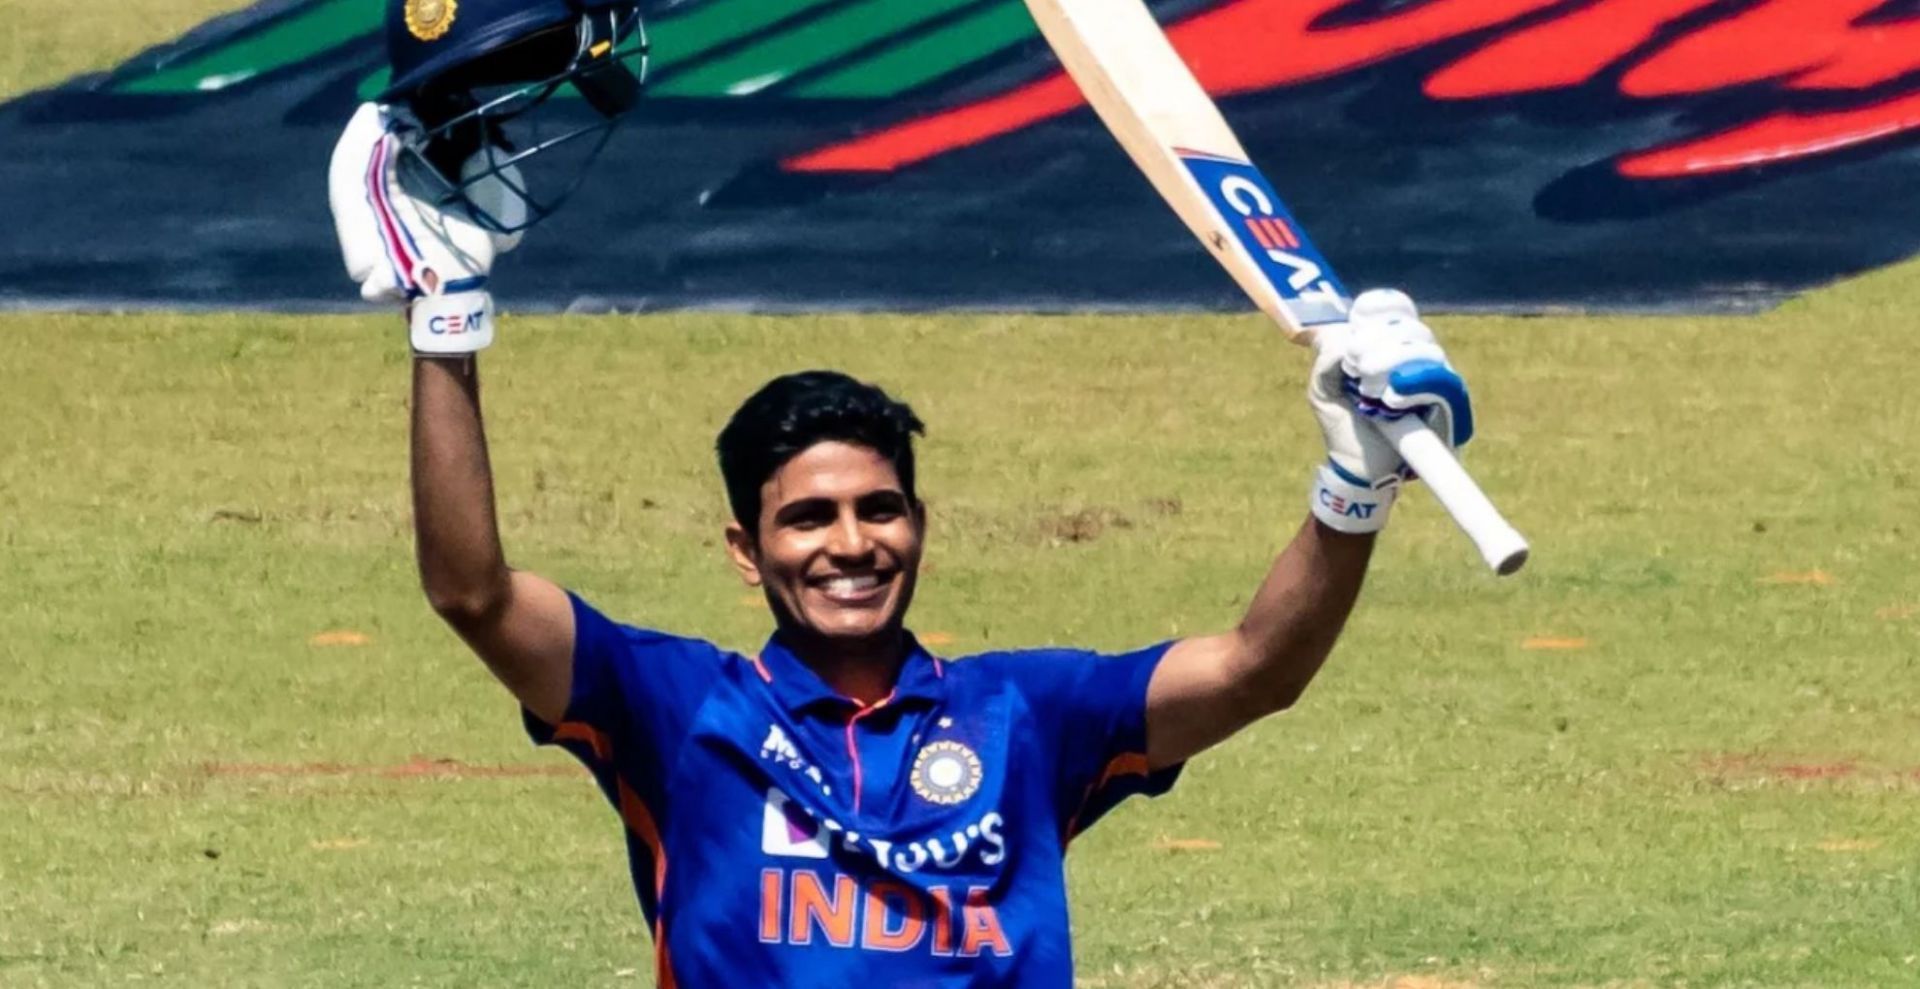 Shubman Gill celebrates after reaching his hundred in the third ODI against Zimbabwe on Monday. (Credits: Getty Images)